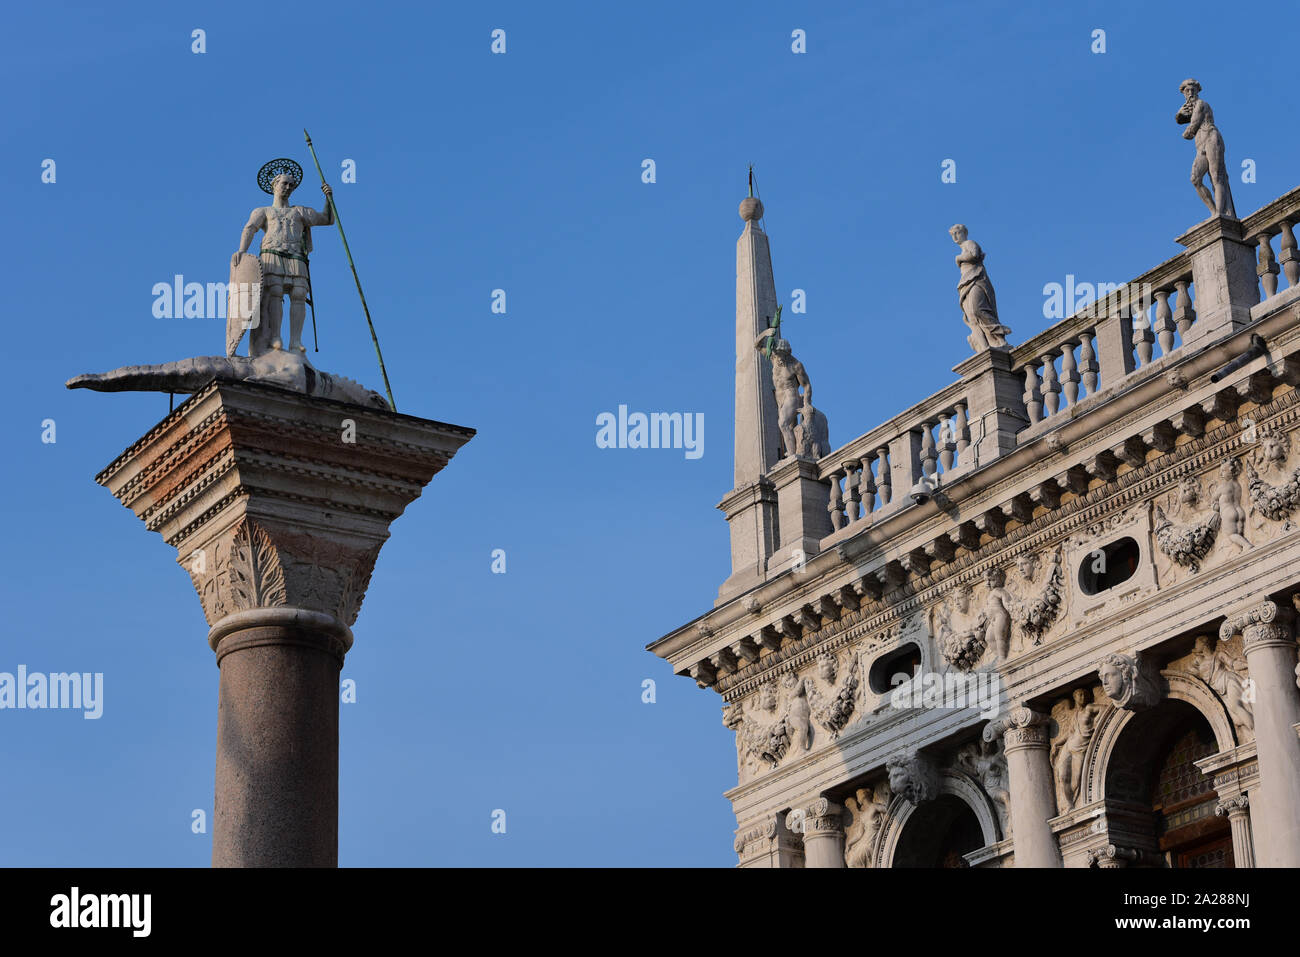 Granite column in the Piazzetta di San Marco, bearing the warrior-saint Theodore, who was the patron of the city before St Mark, Venice, Italy, Europe. Stock Photo